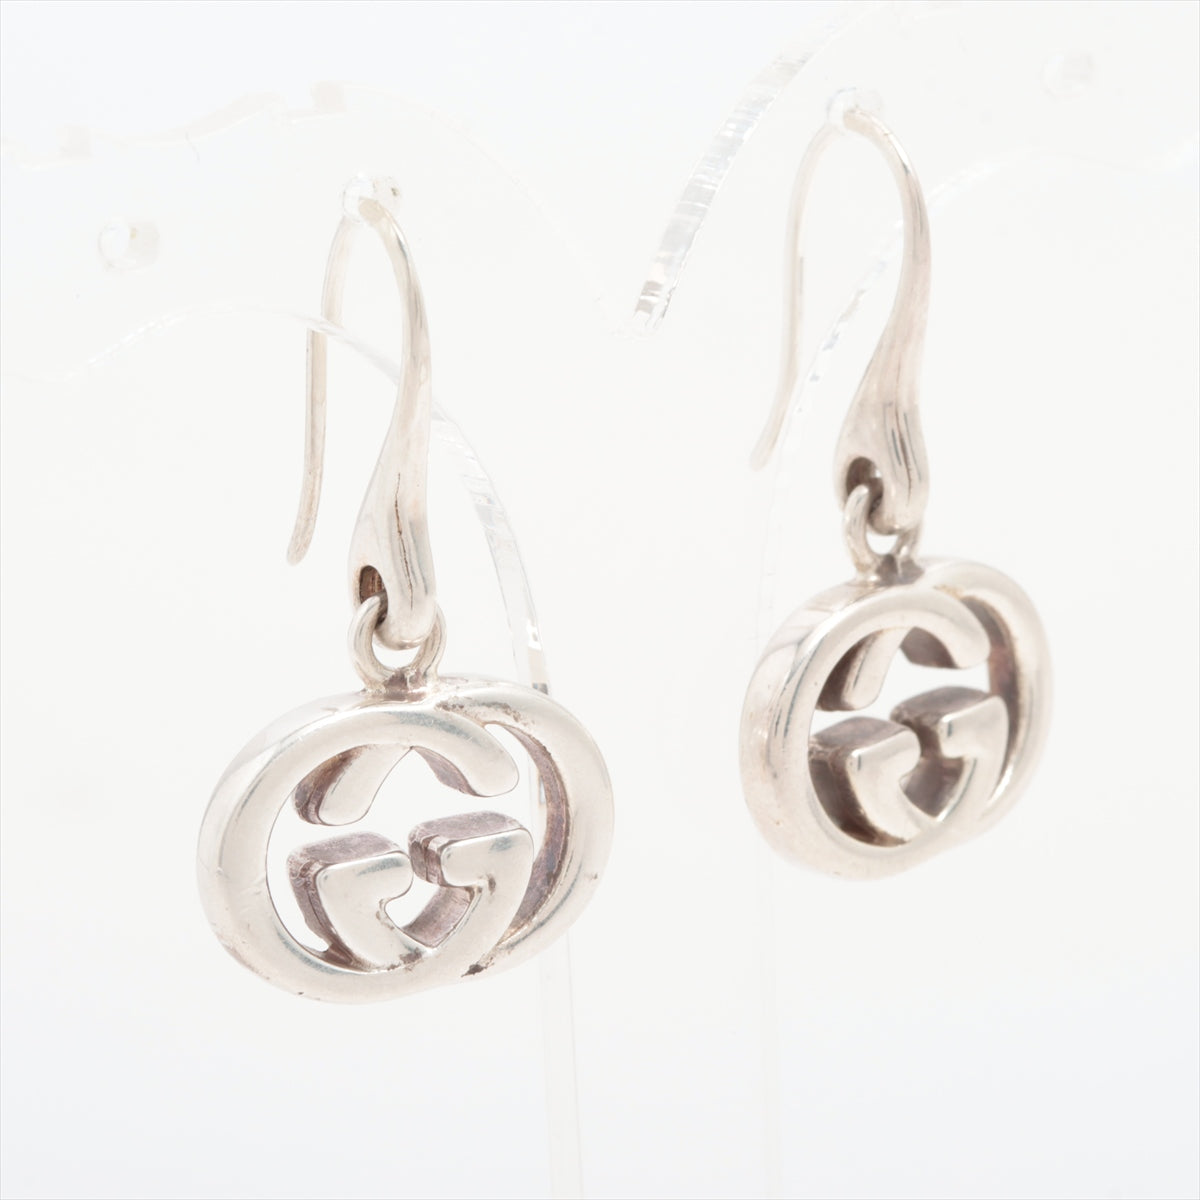 Gucci Interlocking G Piercing jewelry (for both ears) 925 7.7g Silver